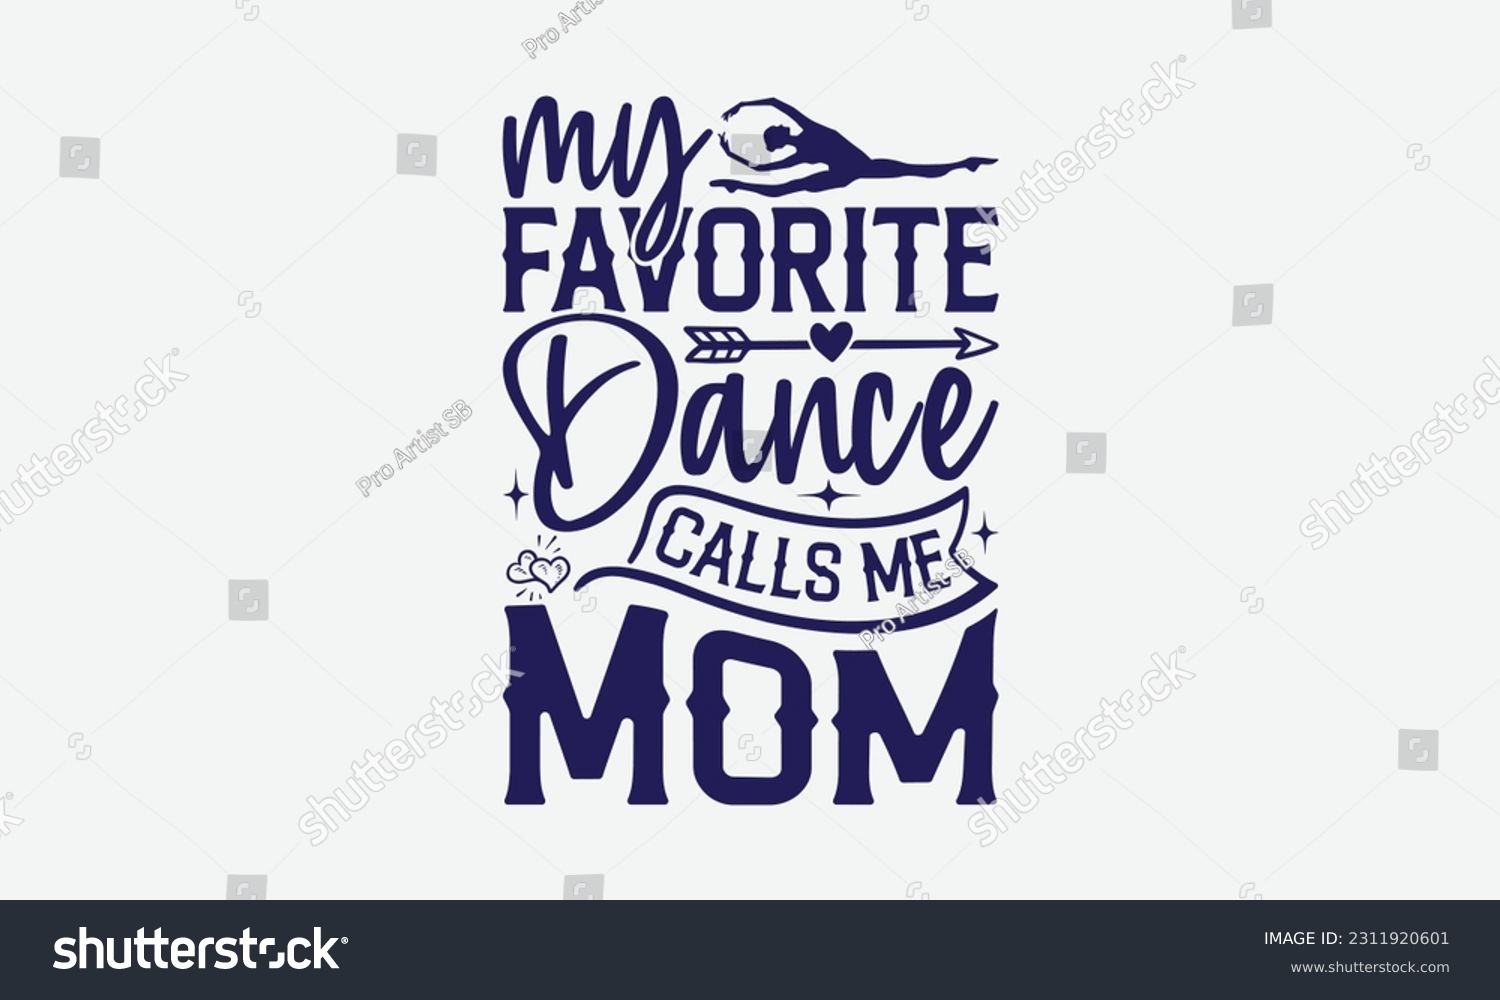 SVG of My Favorite Dance Calls Me Mom - Dancing SVG Design, Dance Quotes, Hand Drawn Vintage Hand Lettering, Poster Vector Design Template, and EPS 10. svg